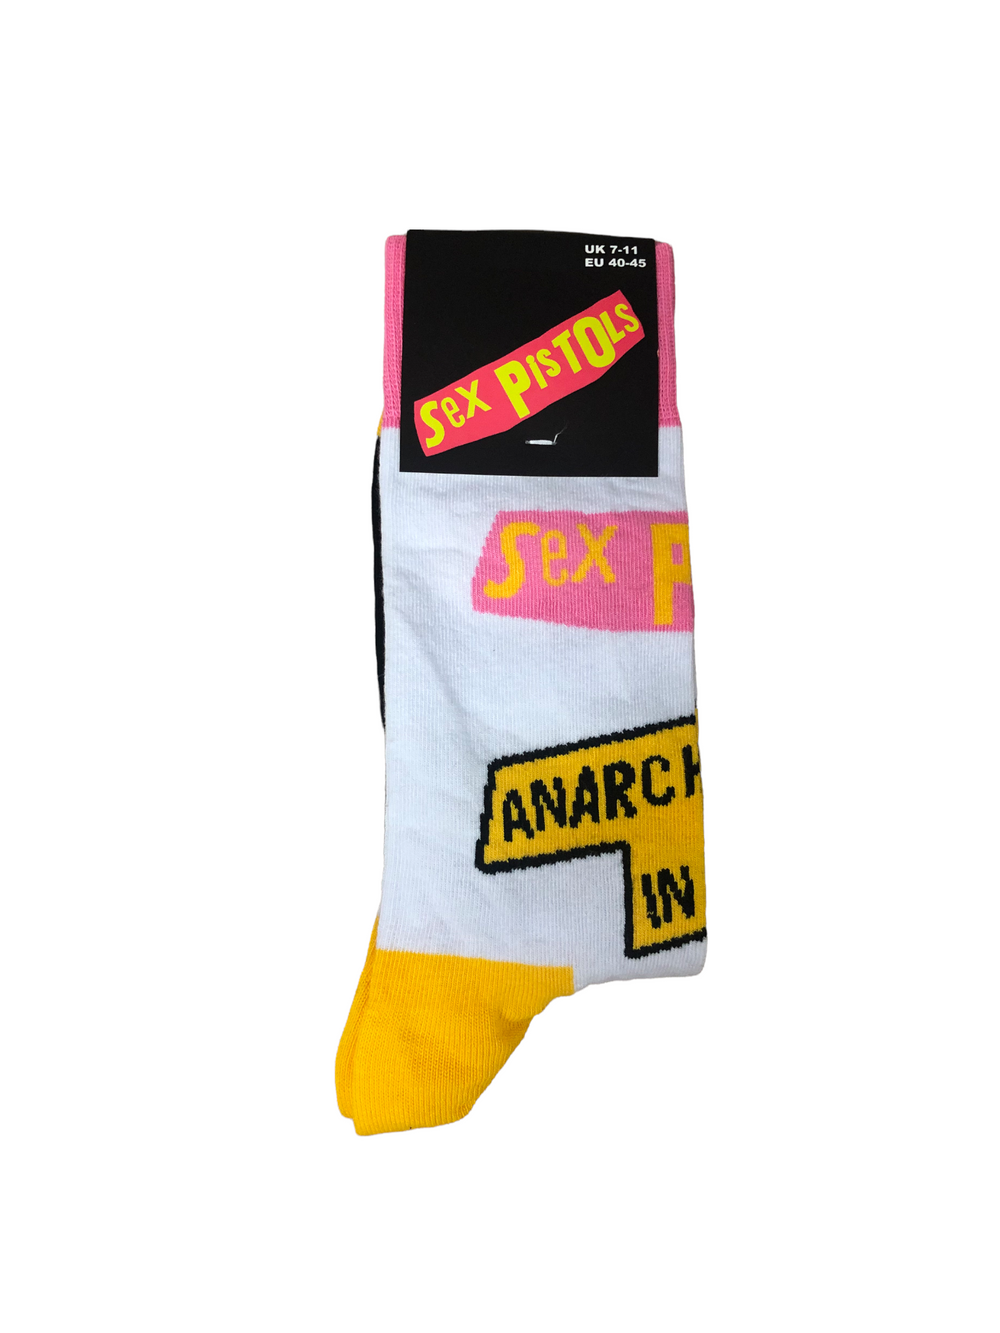 Sex Pistols Anarchy In The UK Official Product 1 Pair Jacquard Socks Brand New